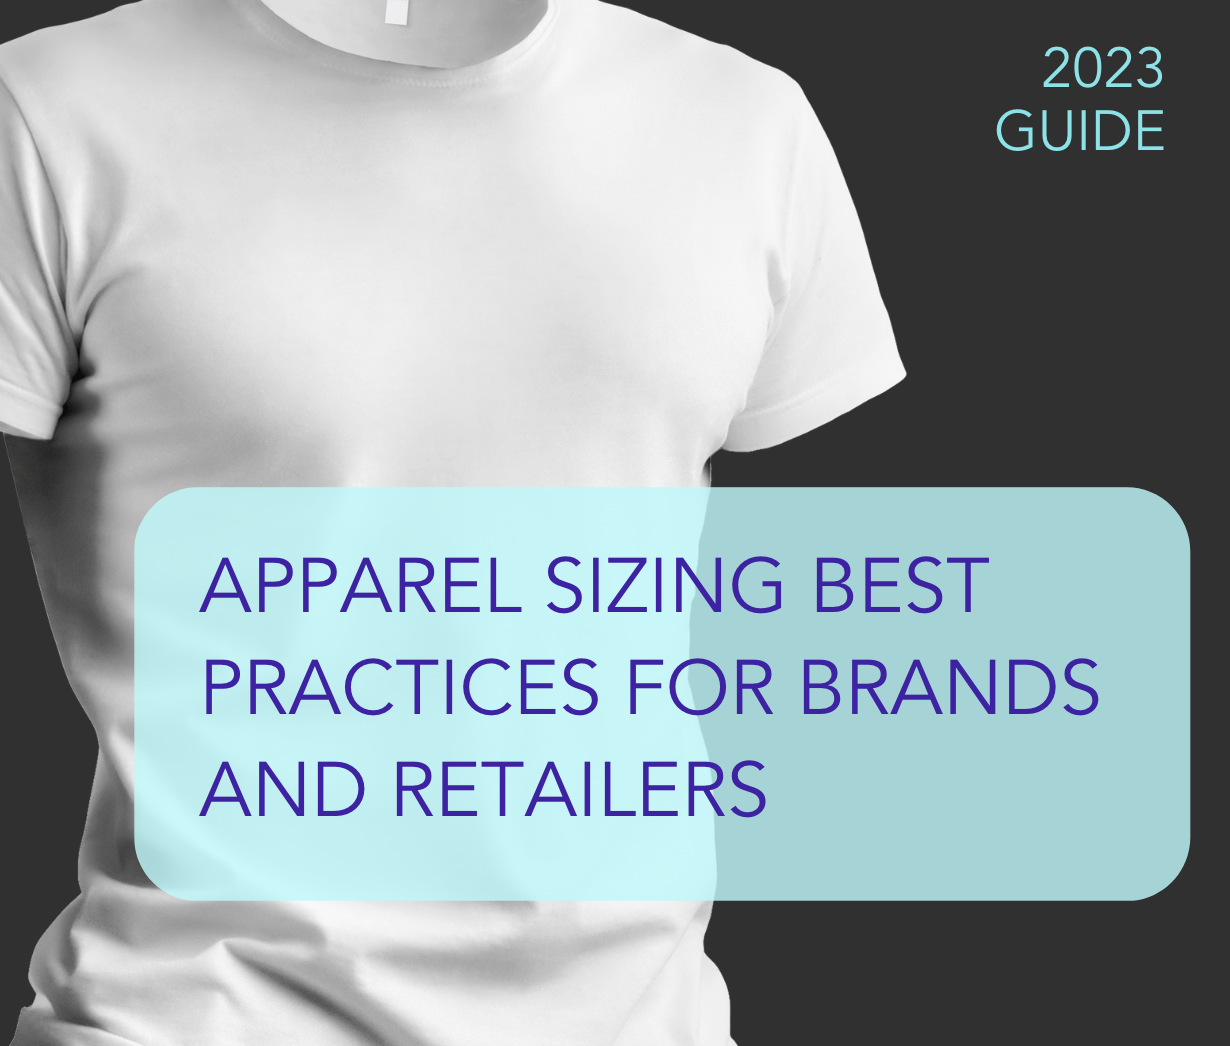 Apparel Sizing Best Practices for Brands and Retailers